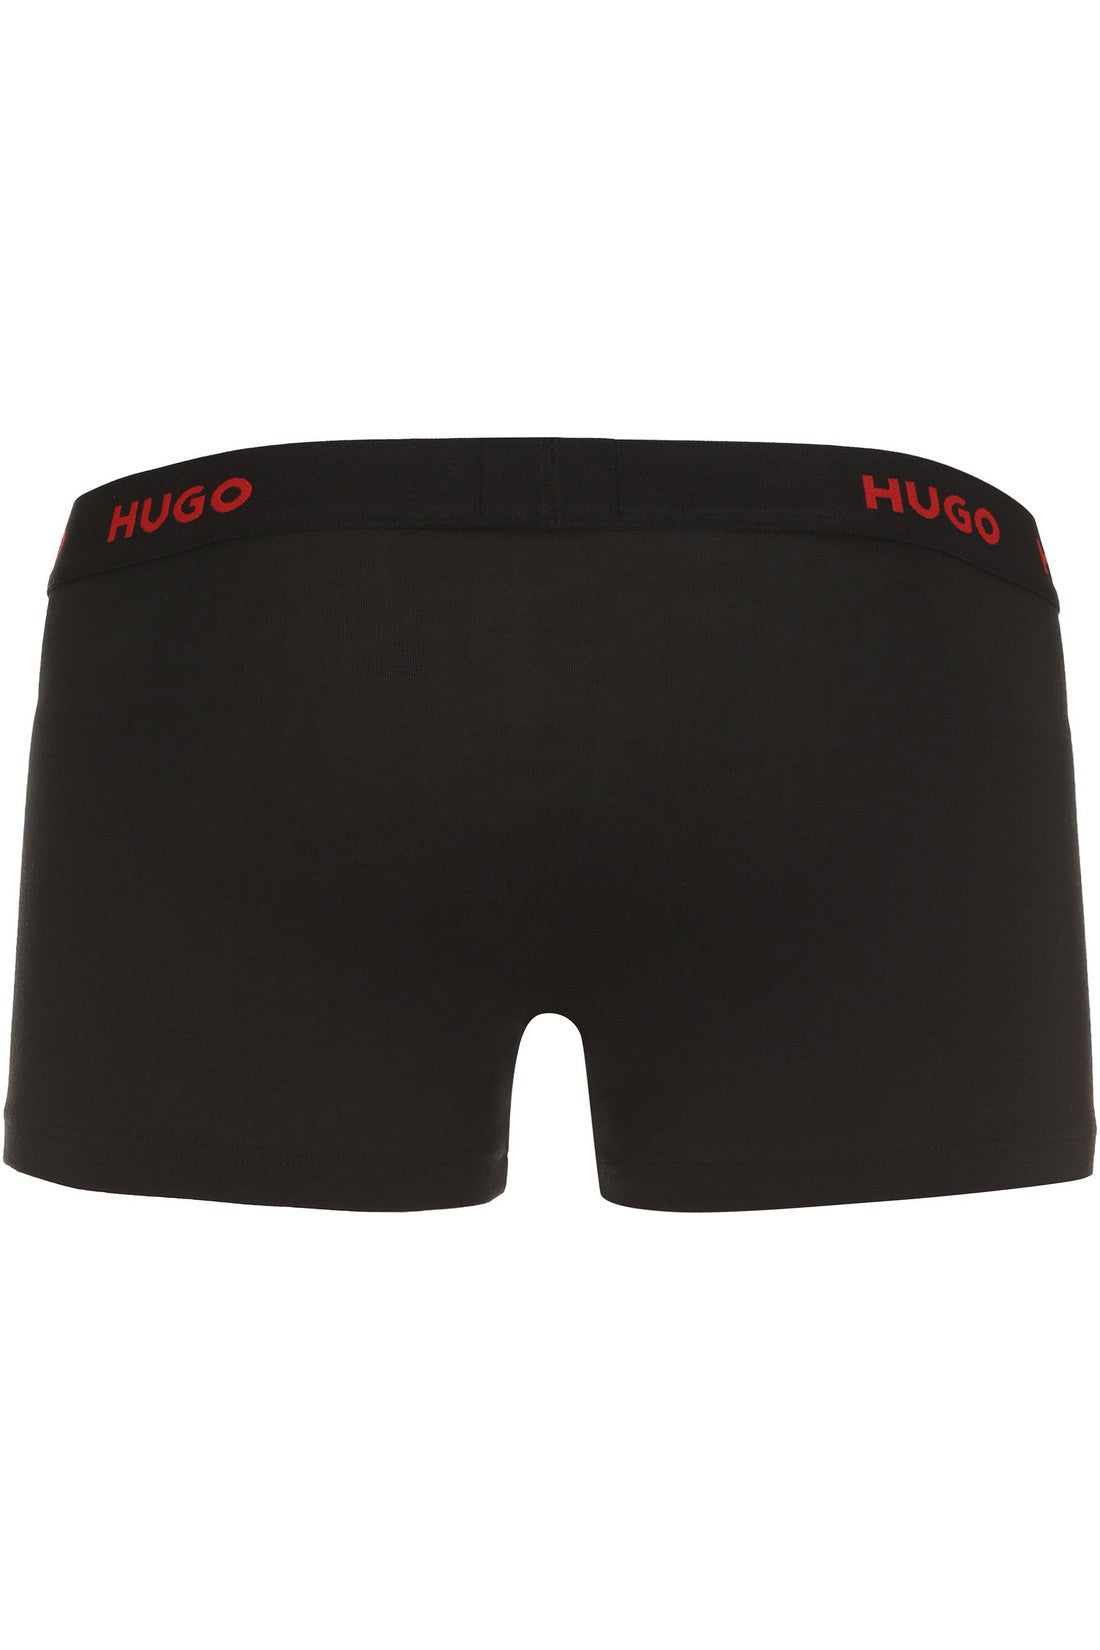 BOSS-OUTLET-SALE-Set of three boxers-ARCHIVIST